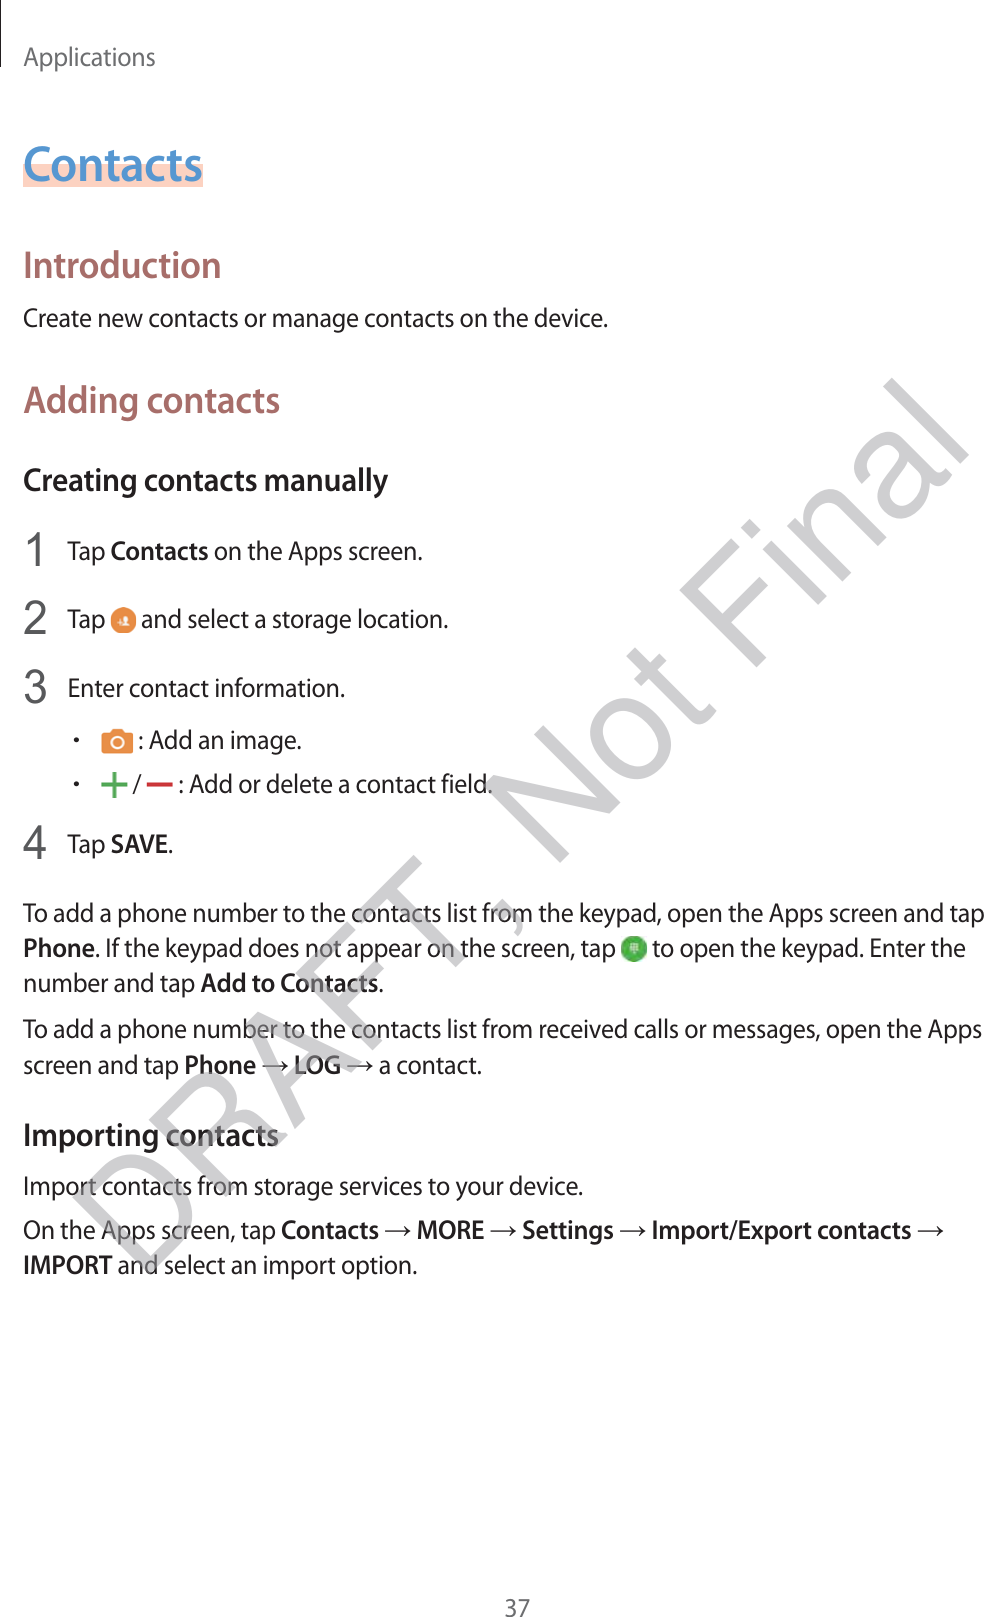 Applications37ContactsIntroductionCreate new contacts or manage contacts on the device.Adding contactsCreating contacts manually1 Tap Contacts on the Apps screen.2 Tap   and select a storage location.3 Enter contact information.r : Add an image.r /   : Add or delete a contact field.4 Tap SAVE.To add a phone number to the contacts list from the keypad, open the Apps screen and tap Phone. If the keypad does not appear on the screen, tap   to open the keypad. Enter the number and tap Add to Contacts.To add a phone number to the contacts list from received calls or messages, open the Apps screen and tap Phone → LOG → a contact.Importing contactsImport contacts from storage services to your device.On the Apps screen, tap Contacts → MORE → Settings → Import/Export contacts → IMPORT and select an import option.DRAFT, Not Final